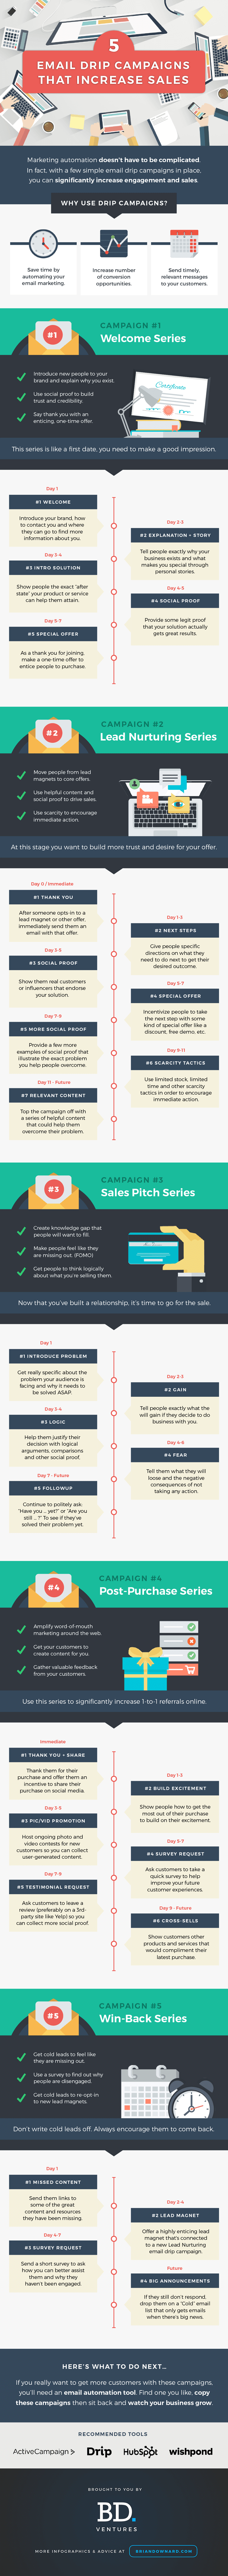 Increase Sales with Email Campaigns Infographic